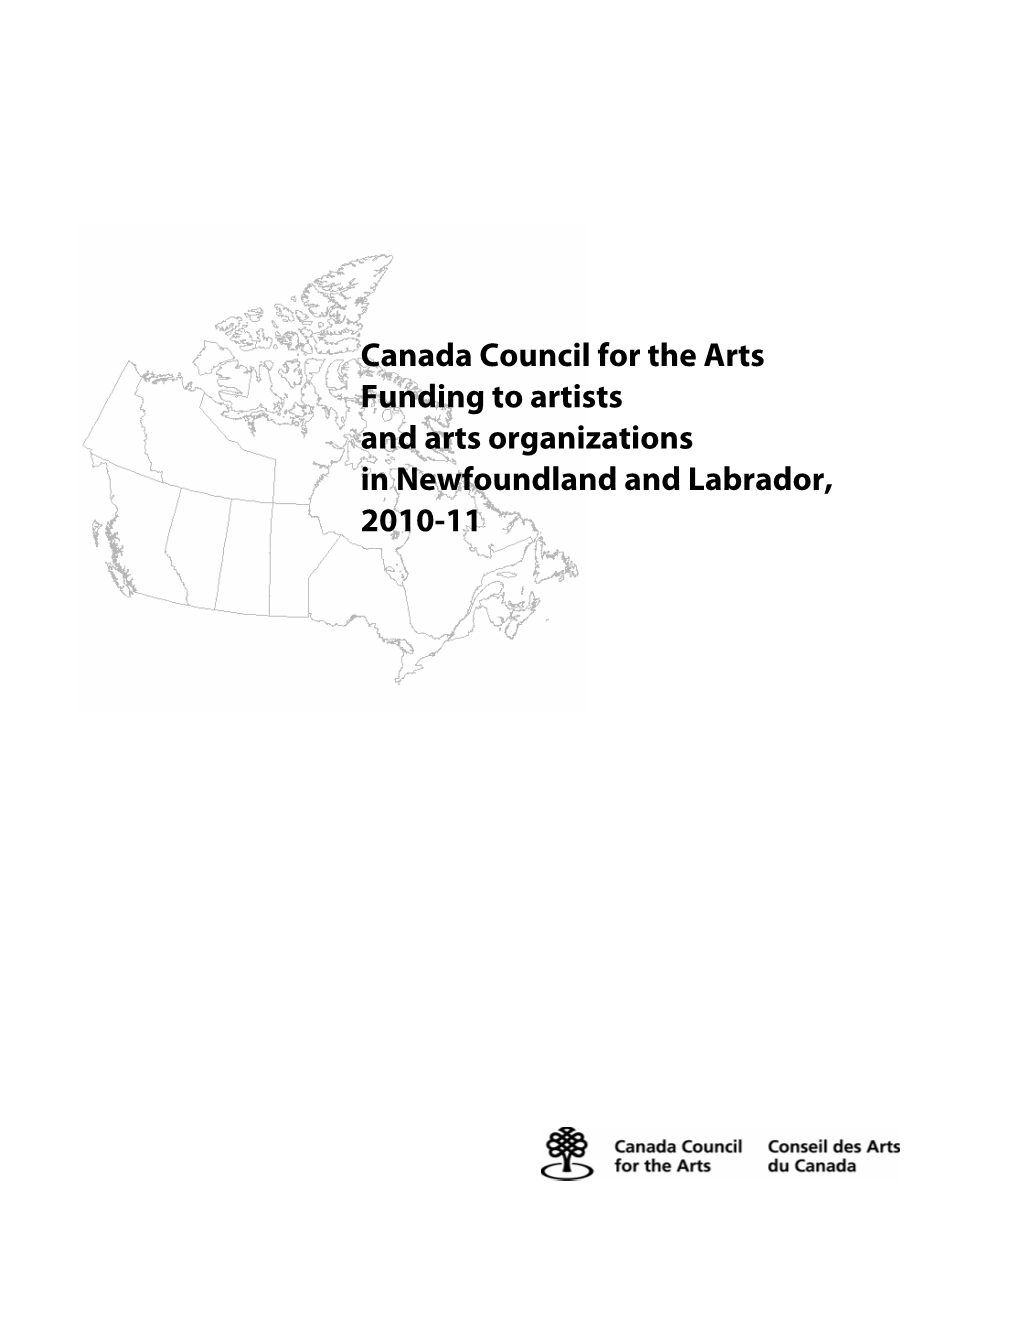 Canada Council for the Arts Funding to Artists and Arts Organizations in Newfoundland and Labrador, 2010-11